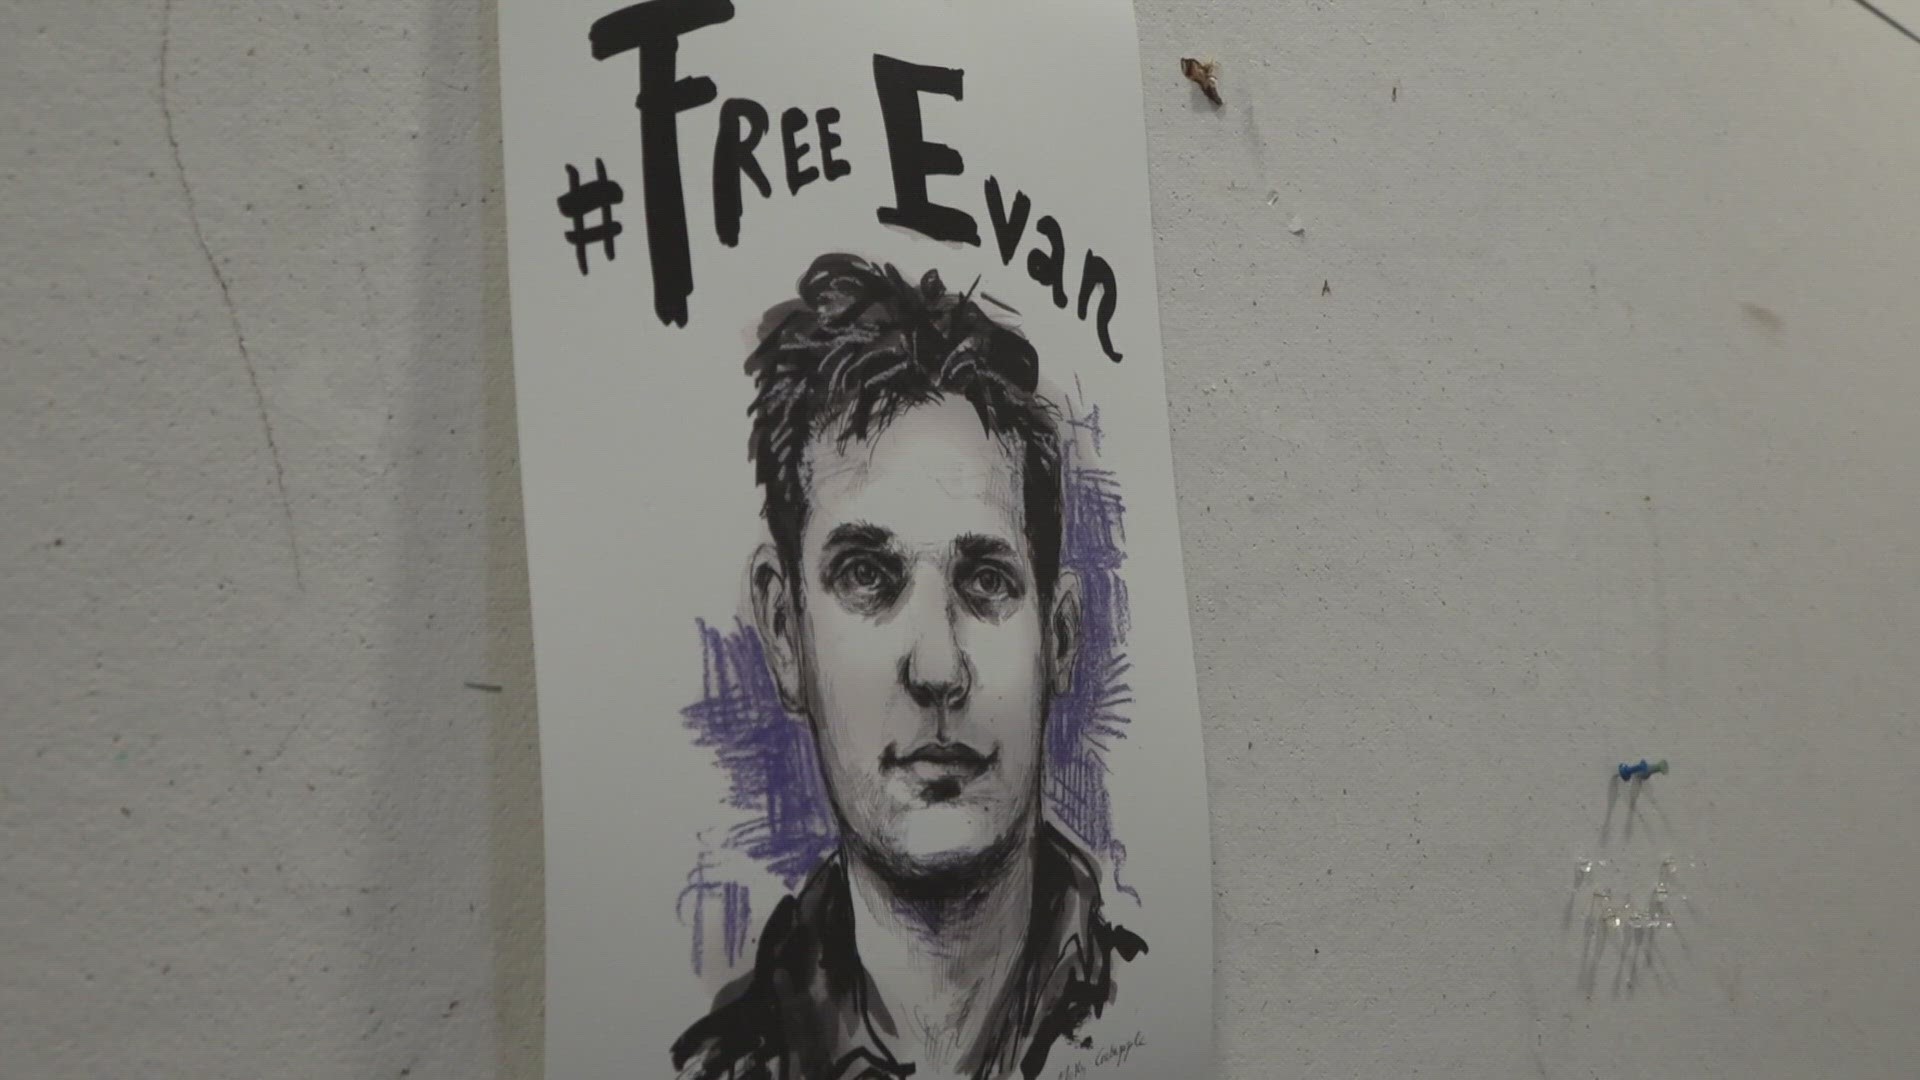 Evan Gershkovich, a Bowdoin College graduate, found out his pre-trial detention was extended by three months. But his family says they are not giving up home.